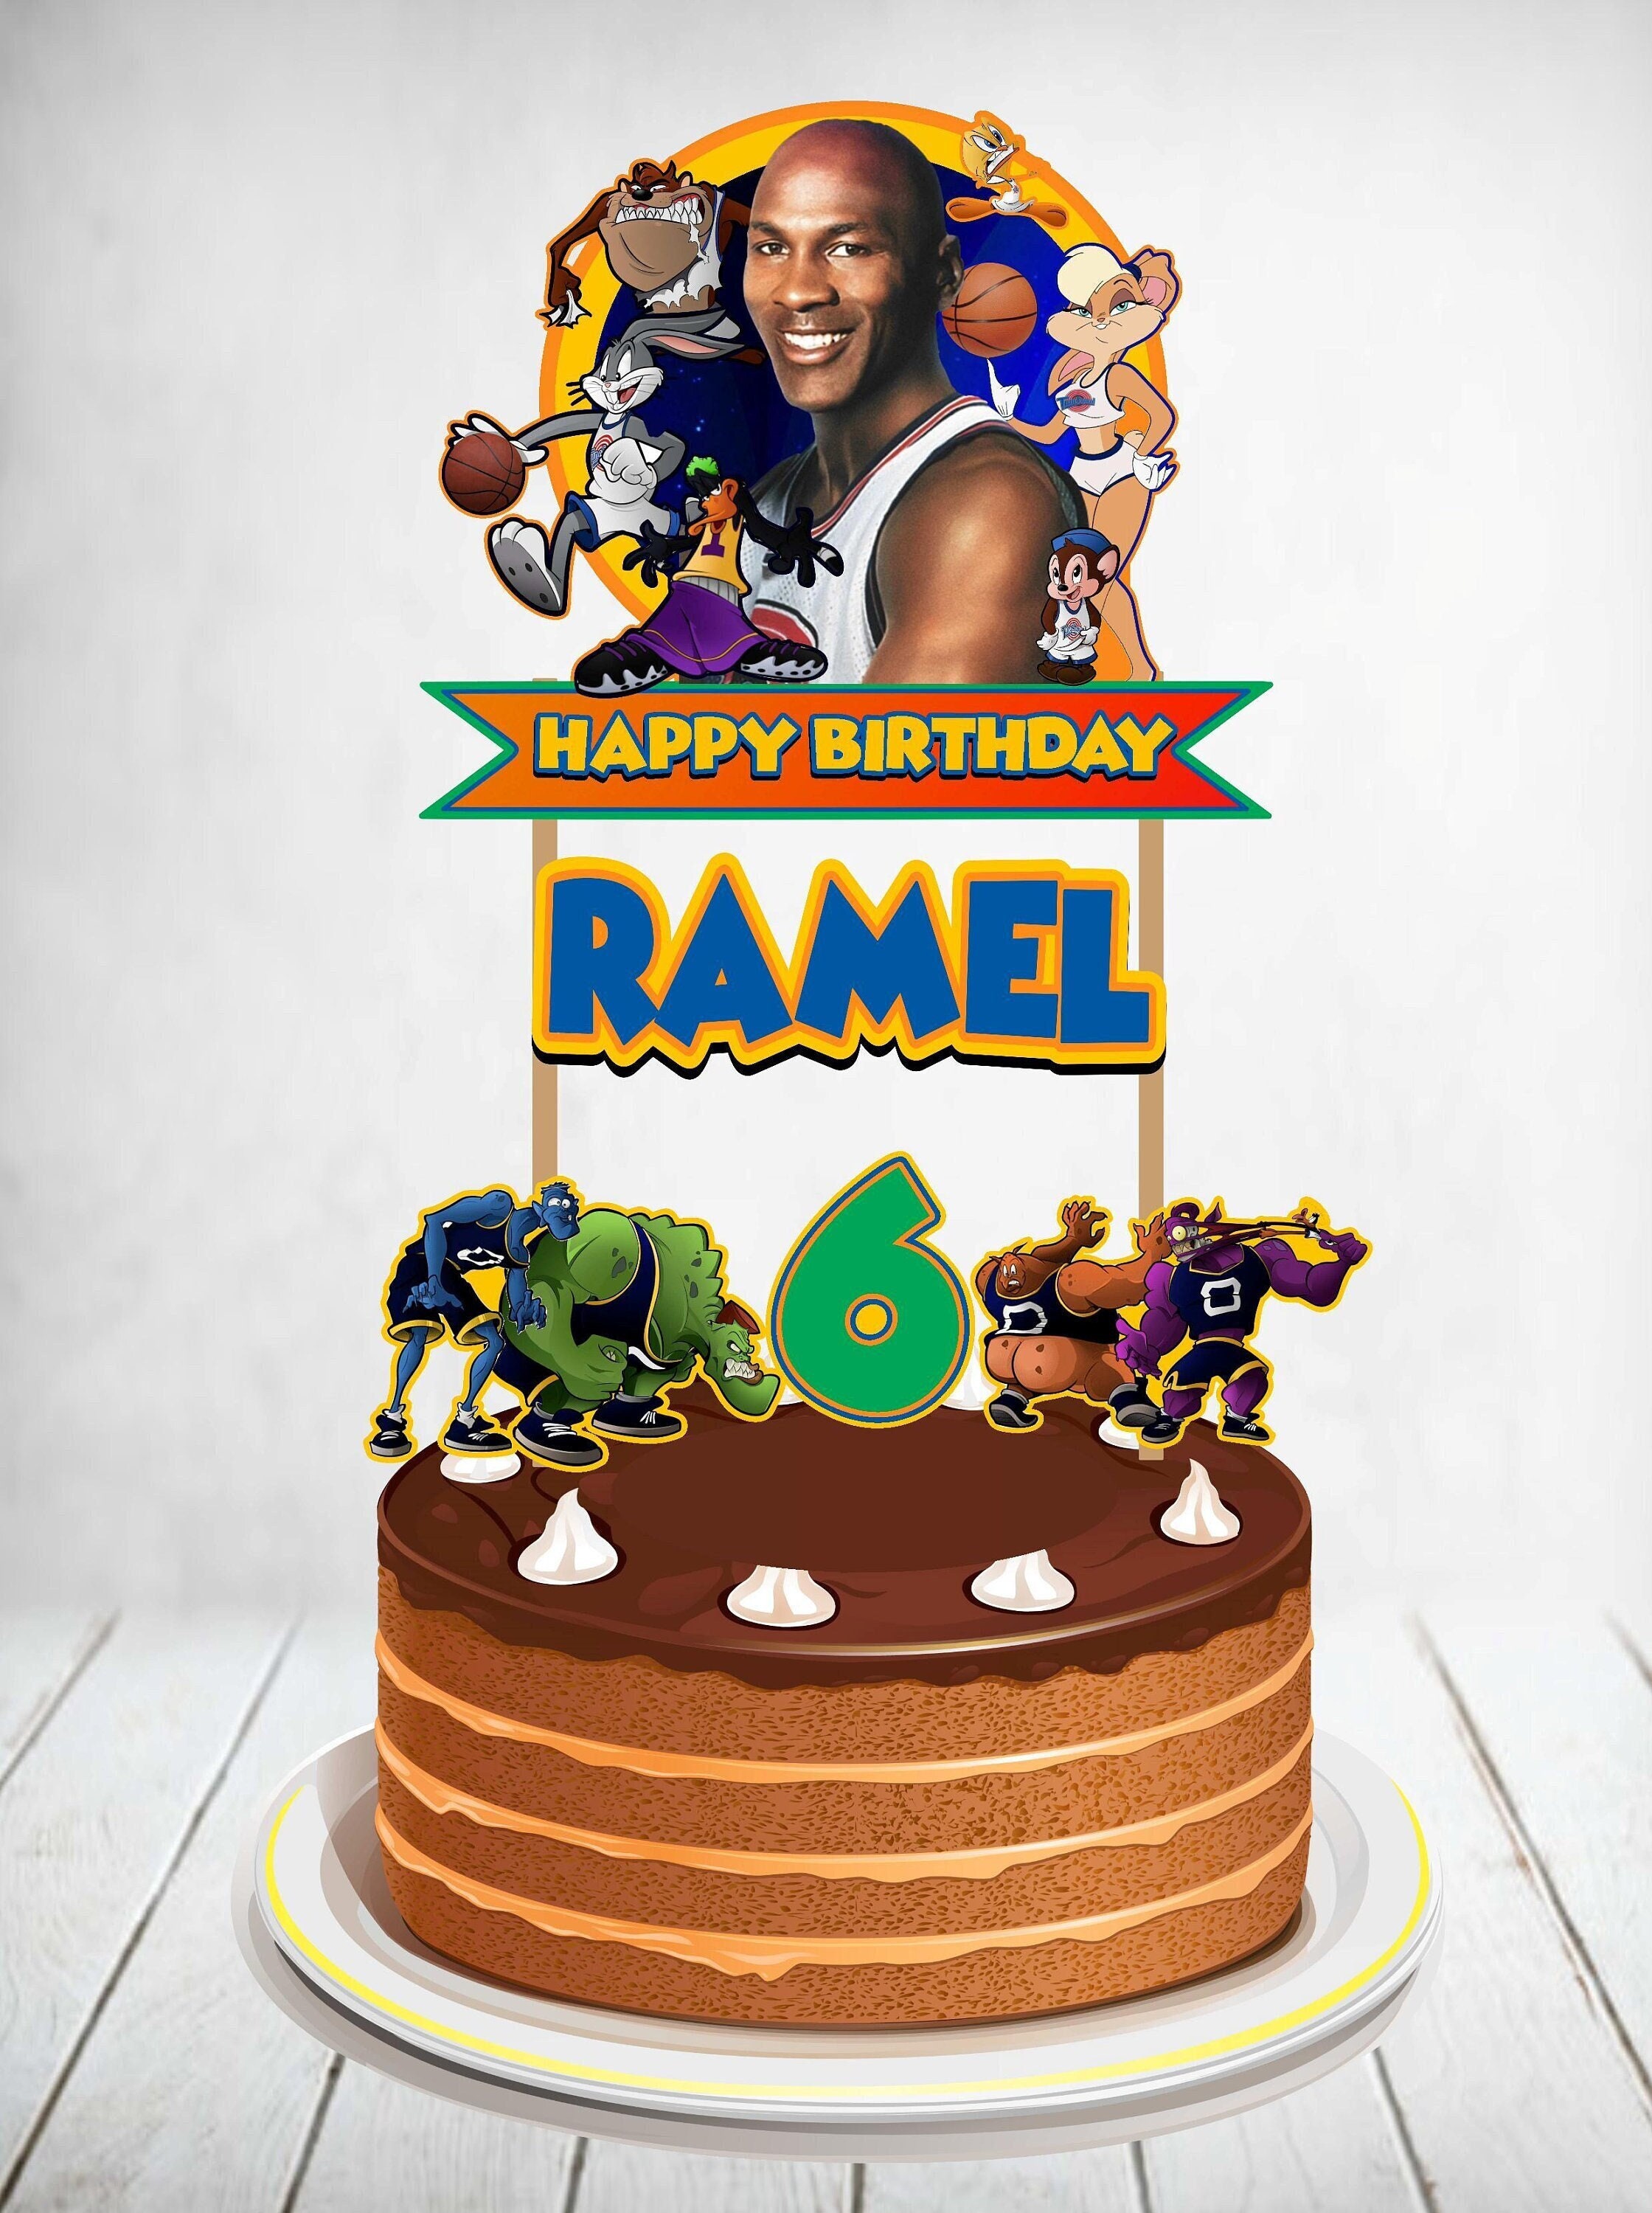 Space Jam Cake Topper Space Jam Party Space Jam Party Supplies Space Jam Birthday Party Space Jam Party Decor Space Jam Birthday